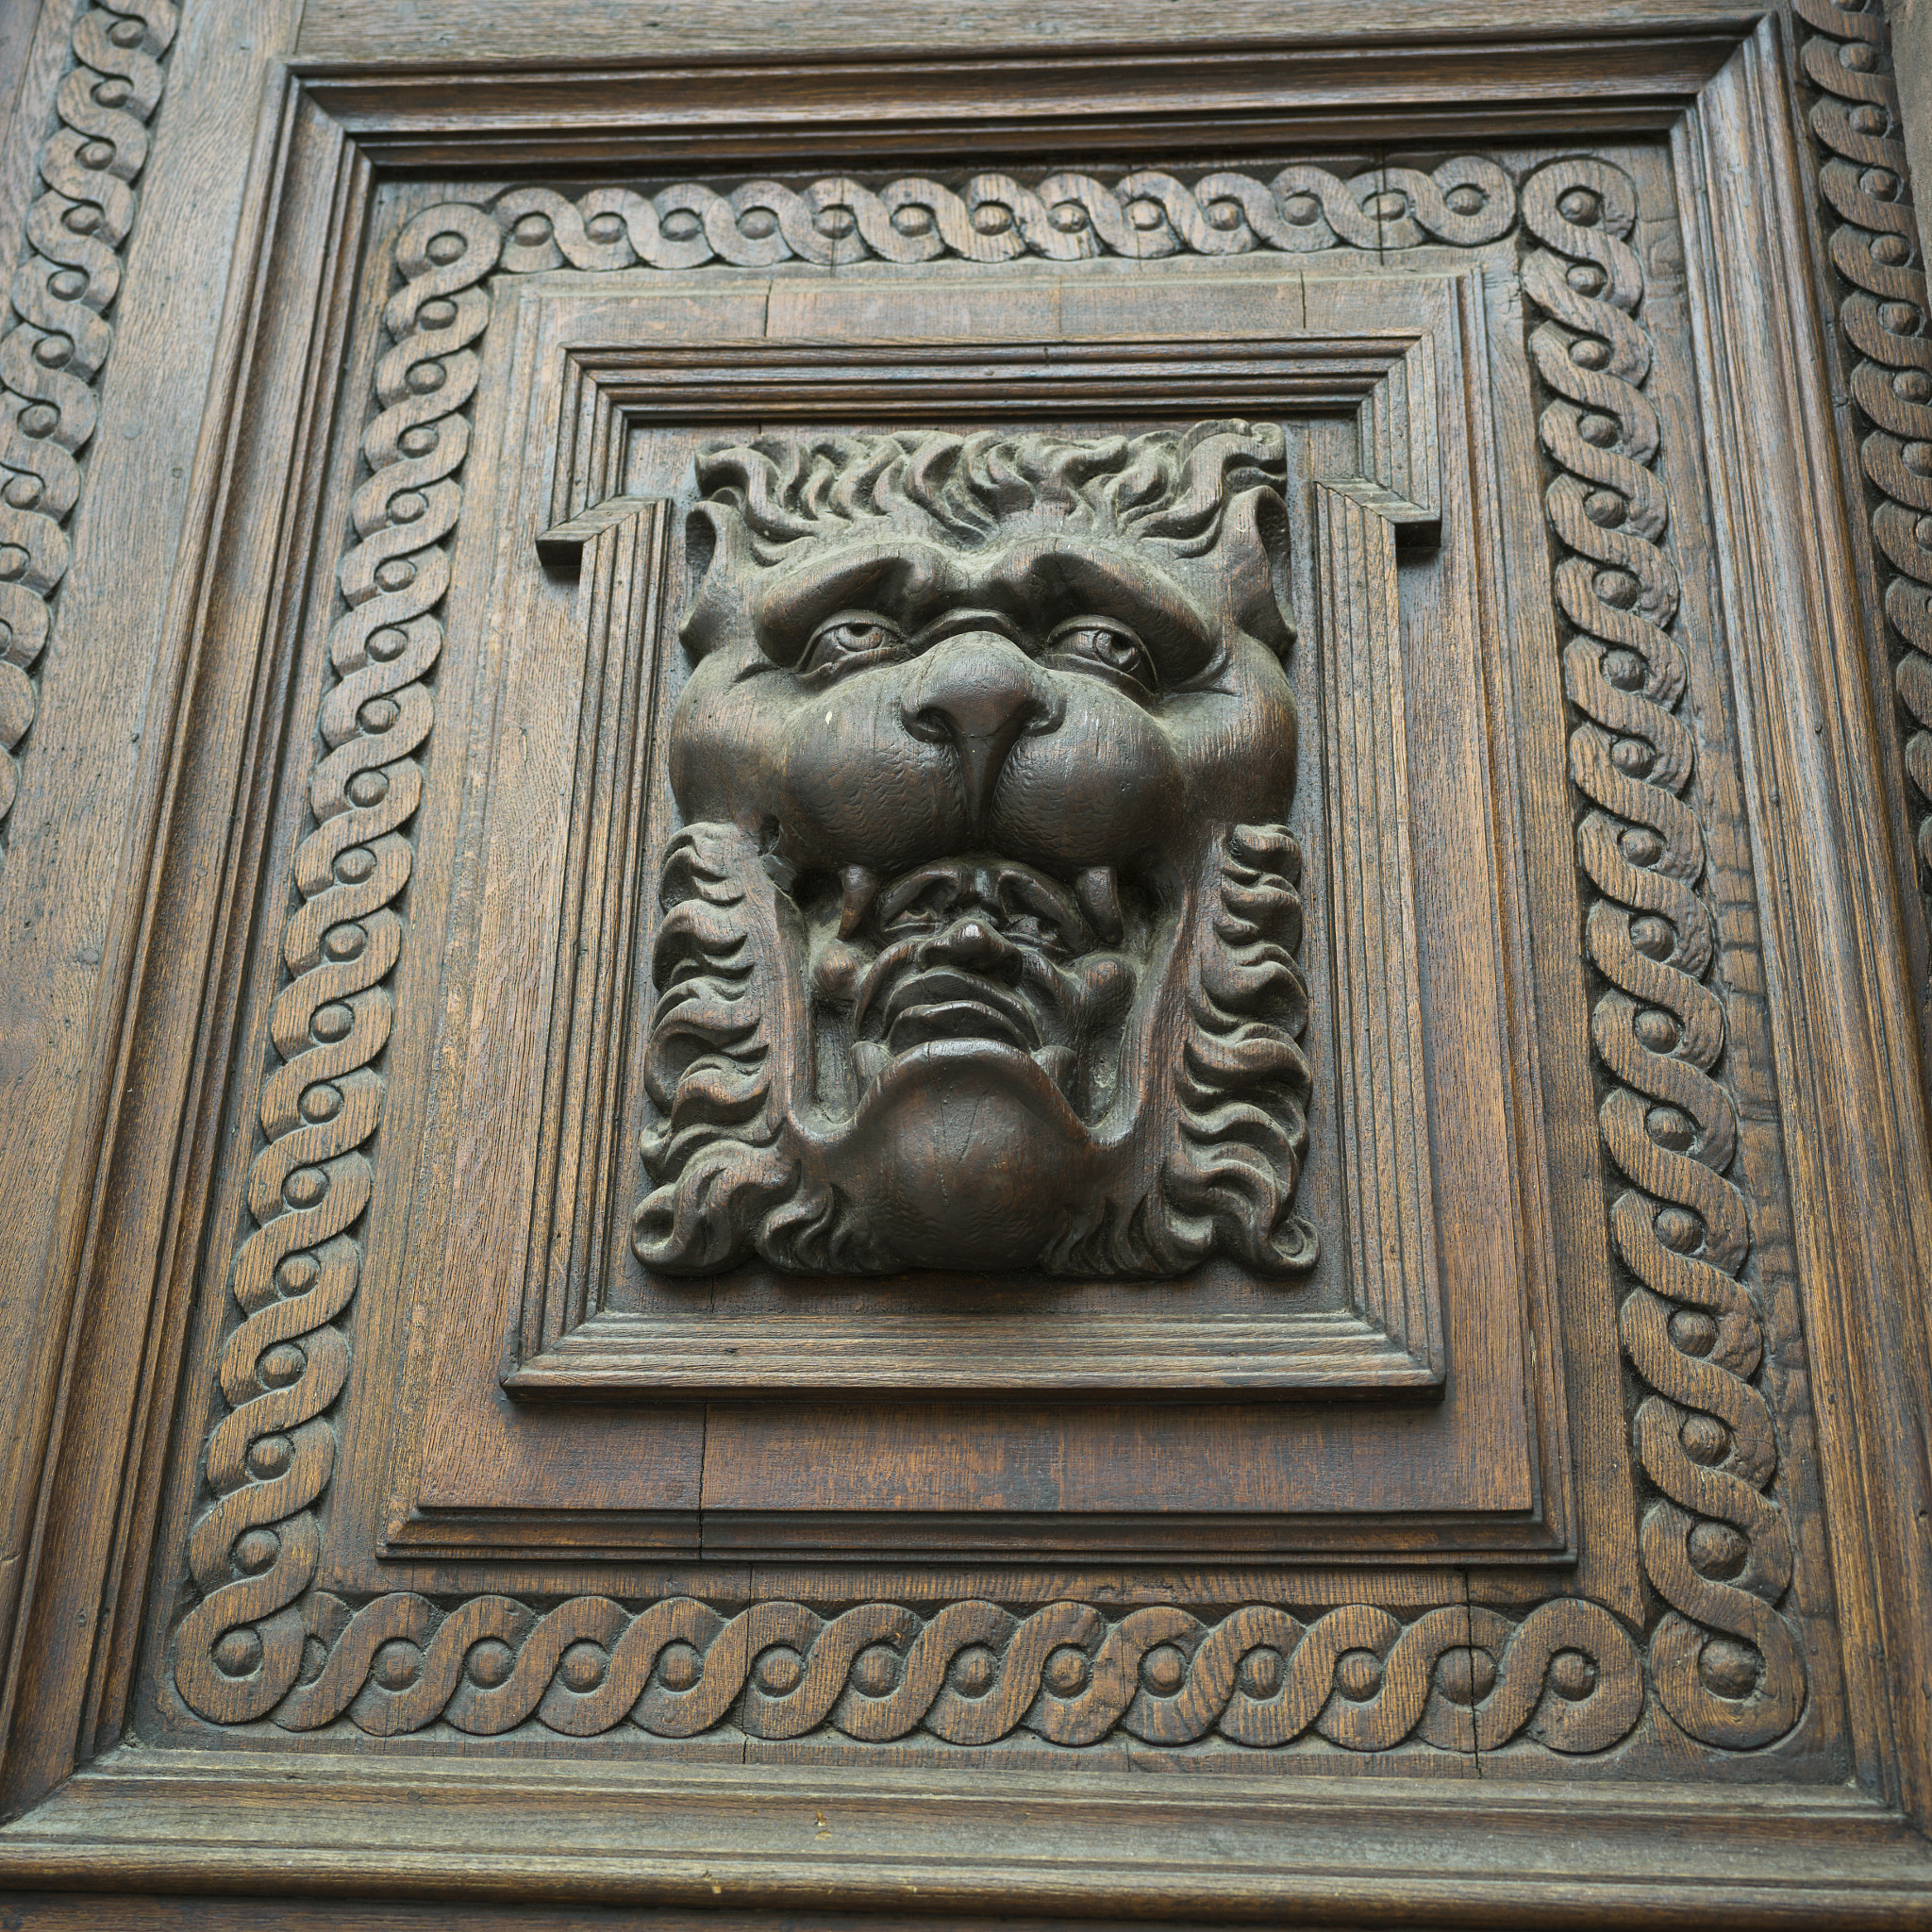 Hasselblad X1D-50c sample photo. Close-up of carvings on wooden door, prague, czech republic photography